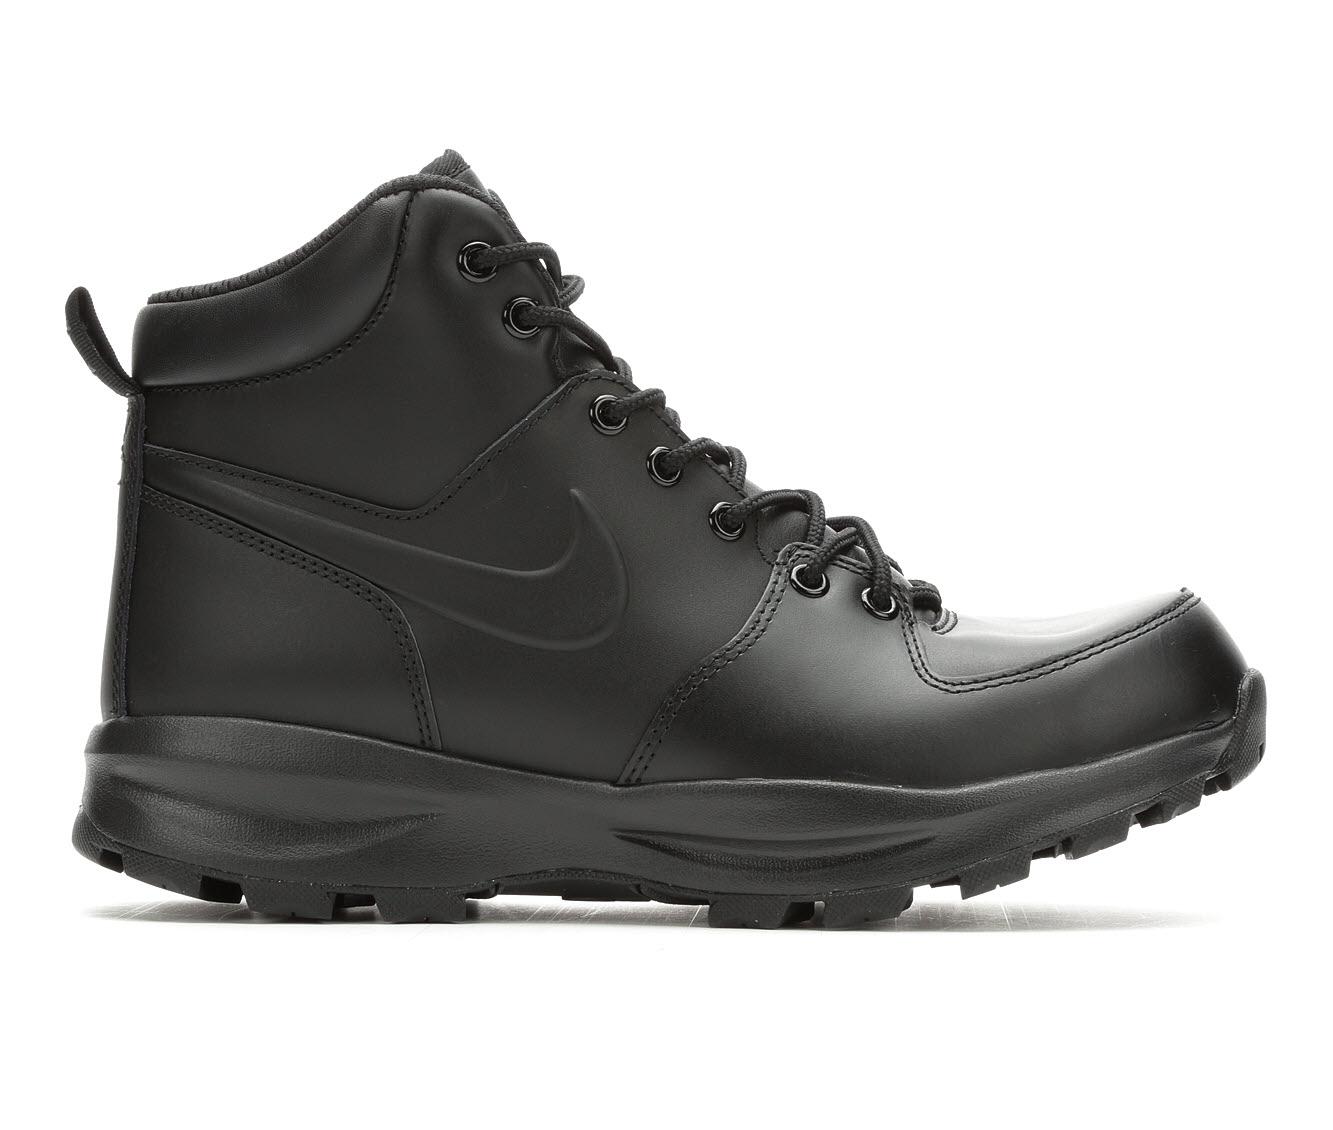 Nike Men's Manoa Leather Boots From Finish Line in Black-Black (Black ...